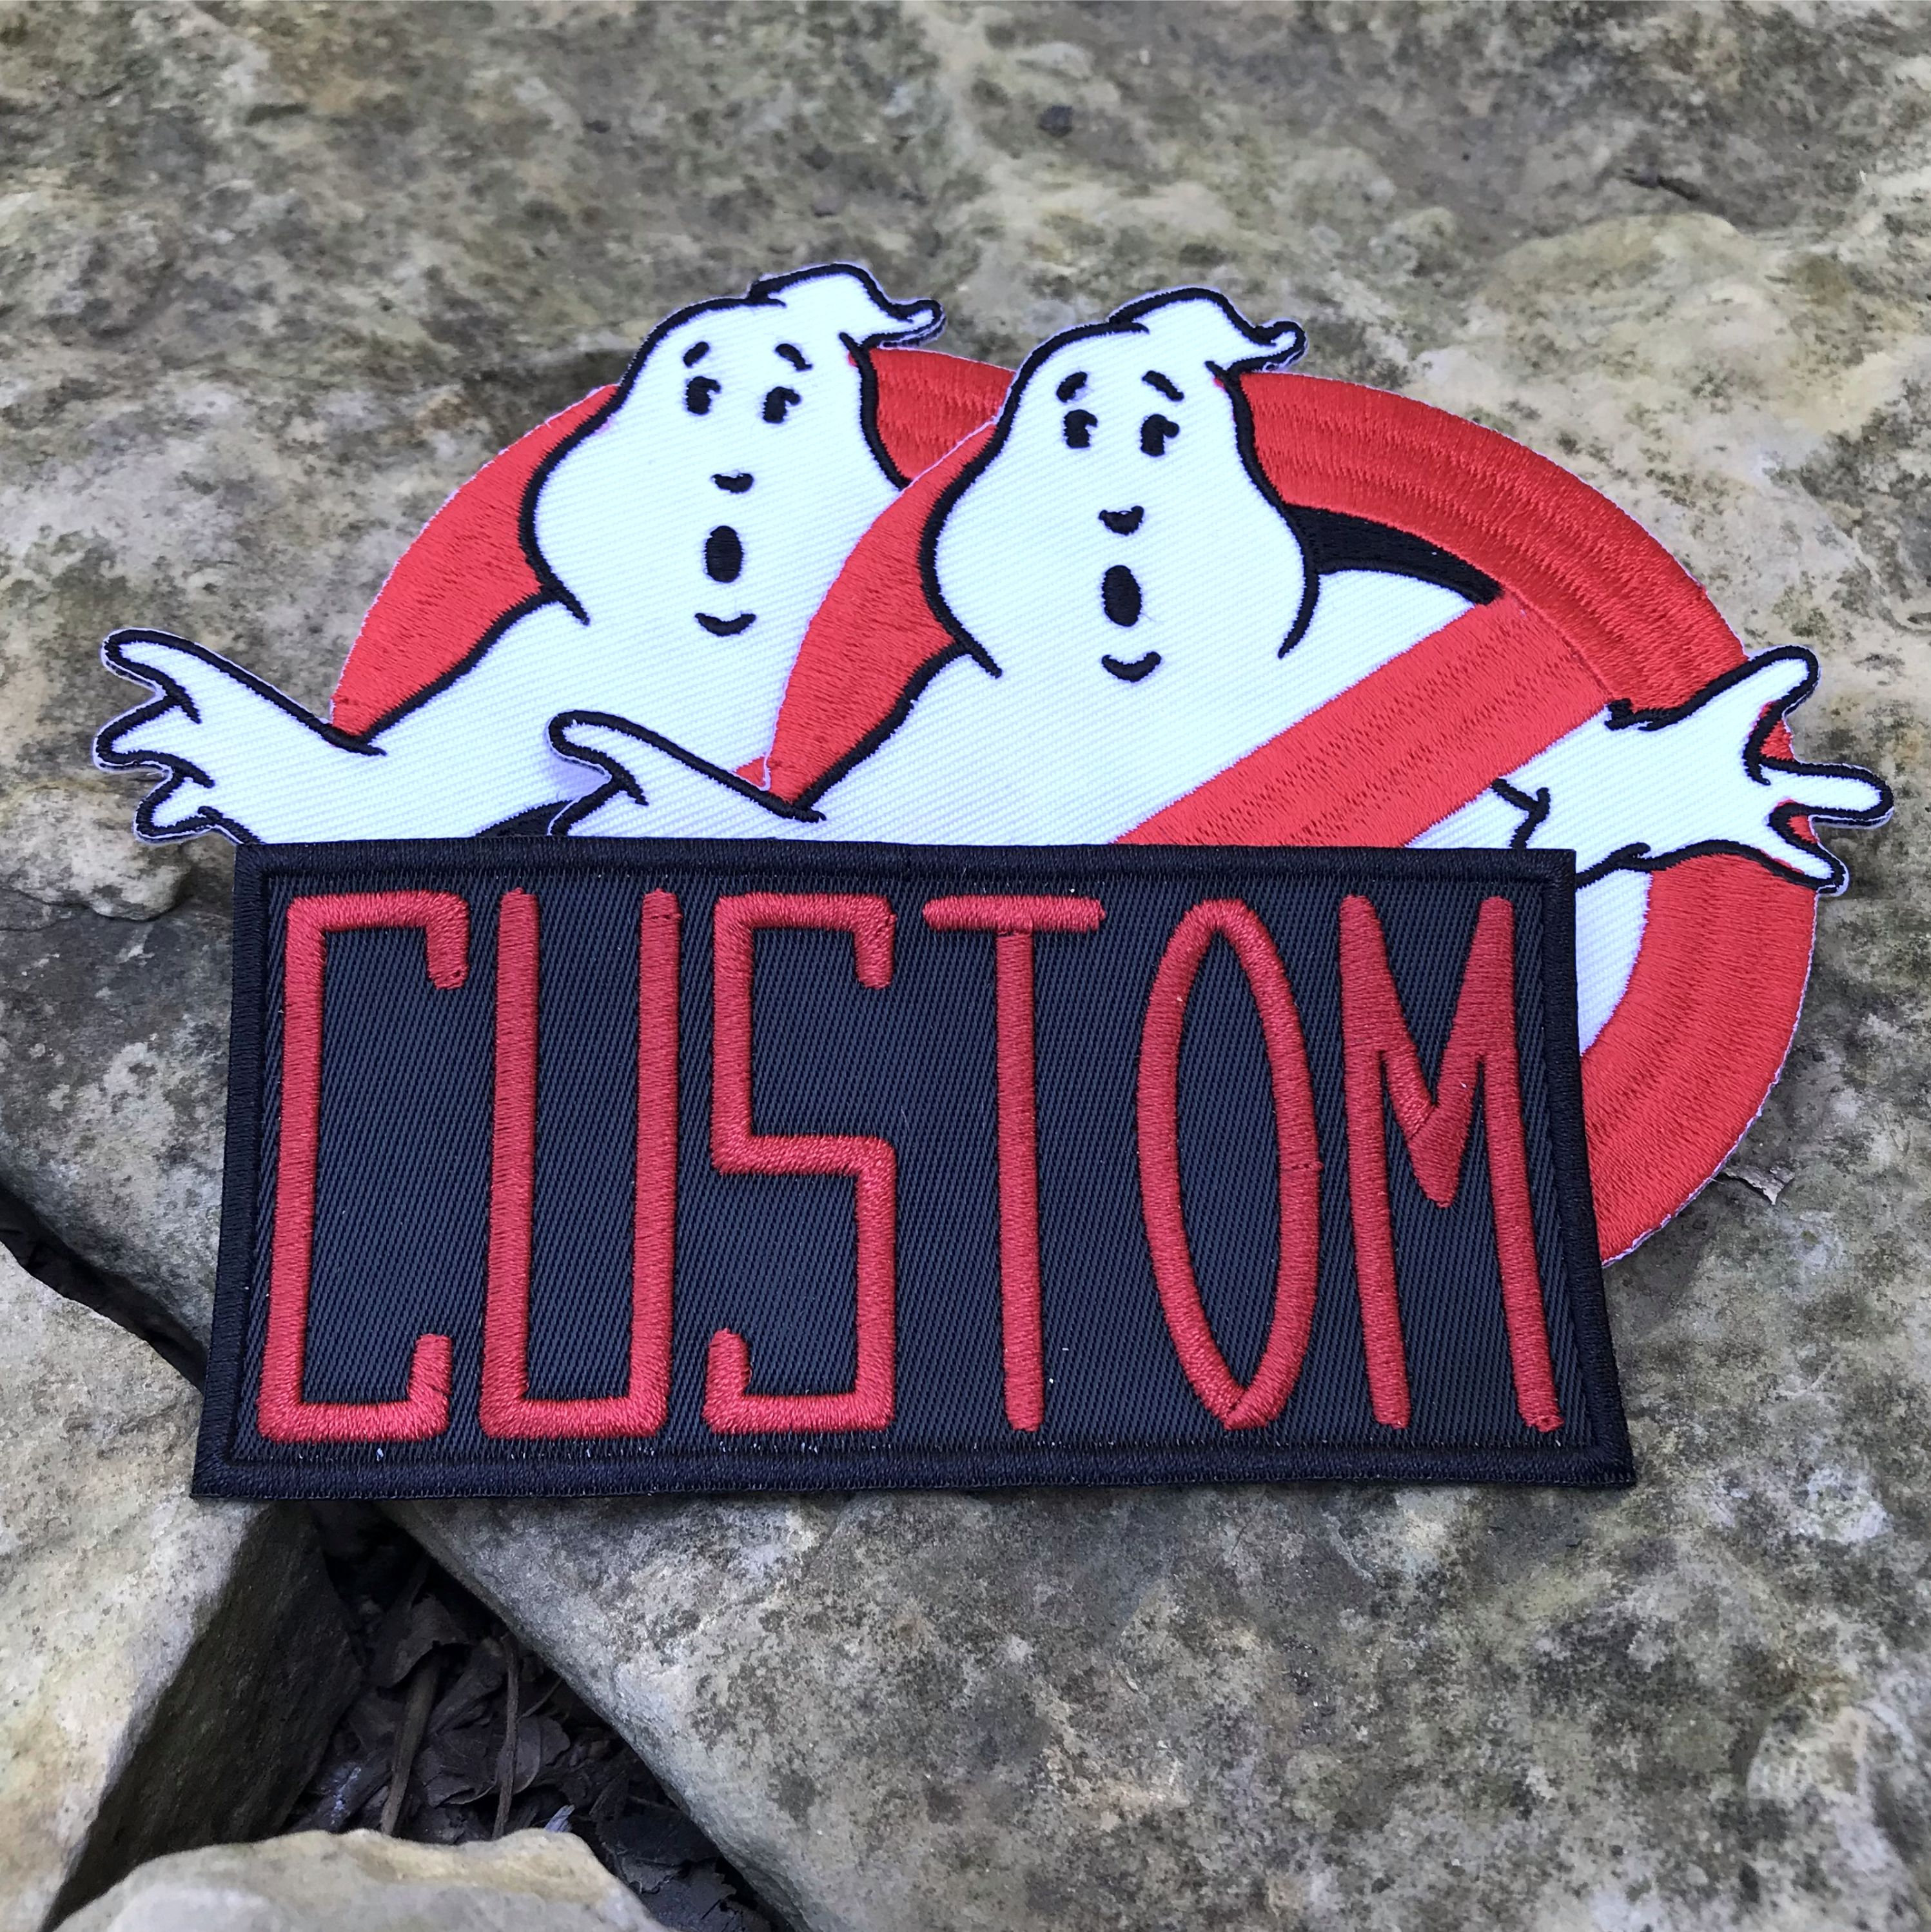 Ghostbusters Spengler Name Tag & No Ghost Iron On Applique Patch 